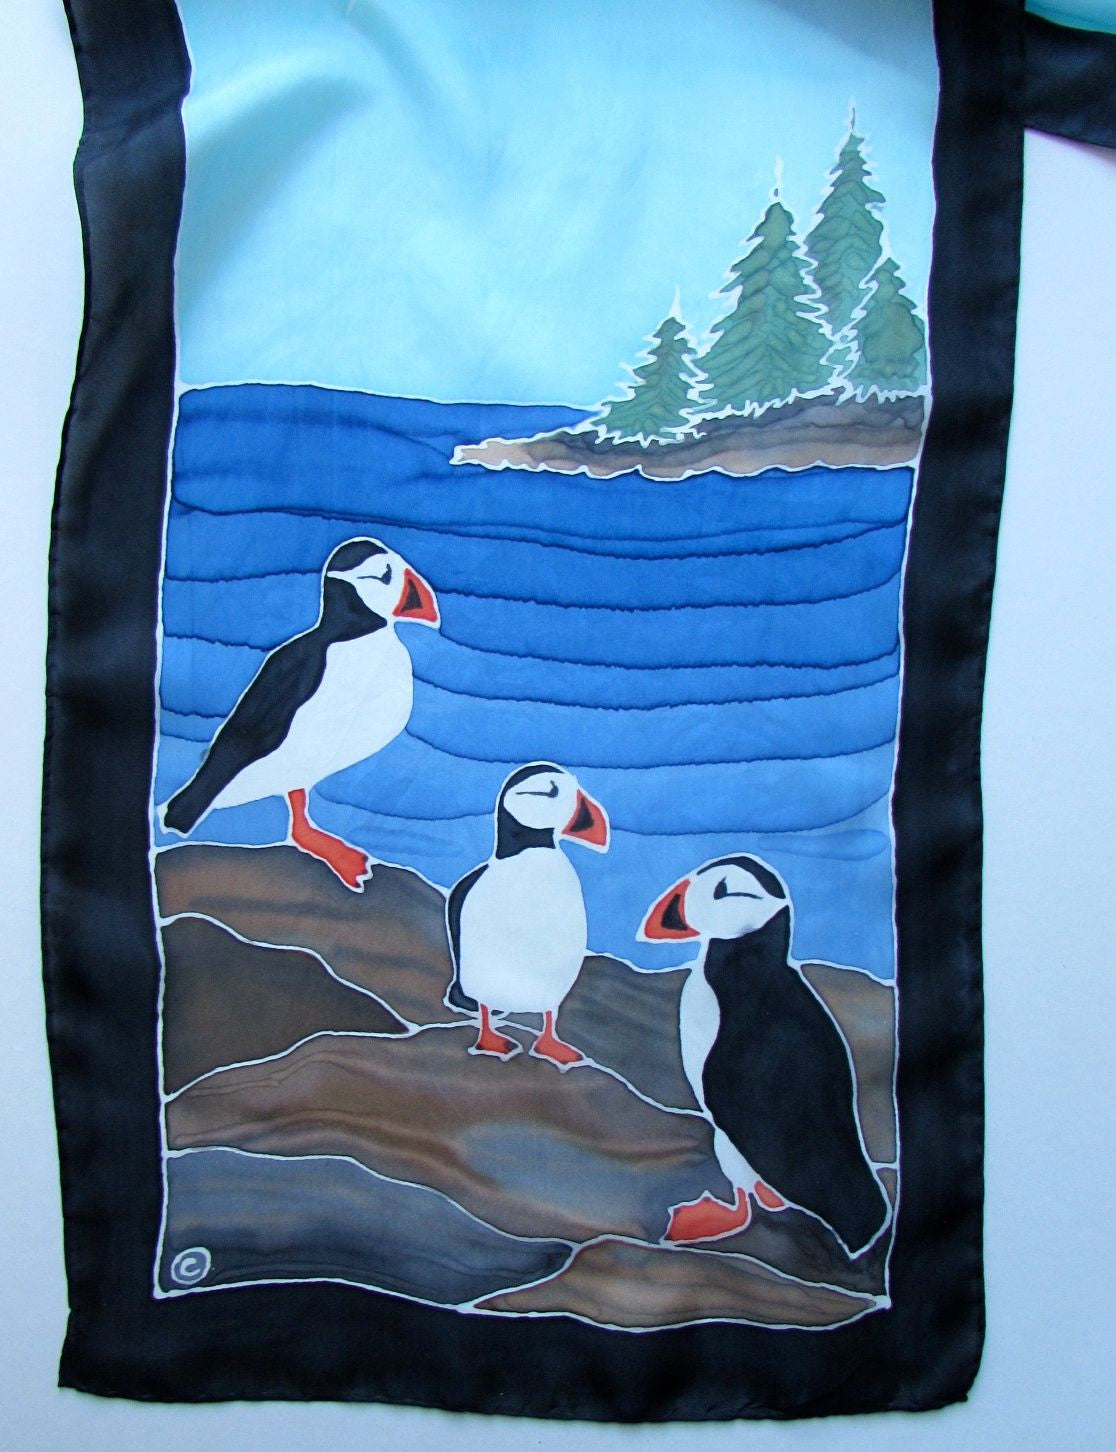 "Puffin Power" - Hand-dyed Silk Scarf - $150